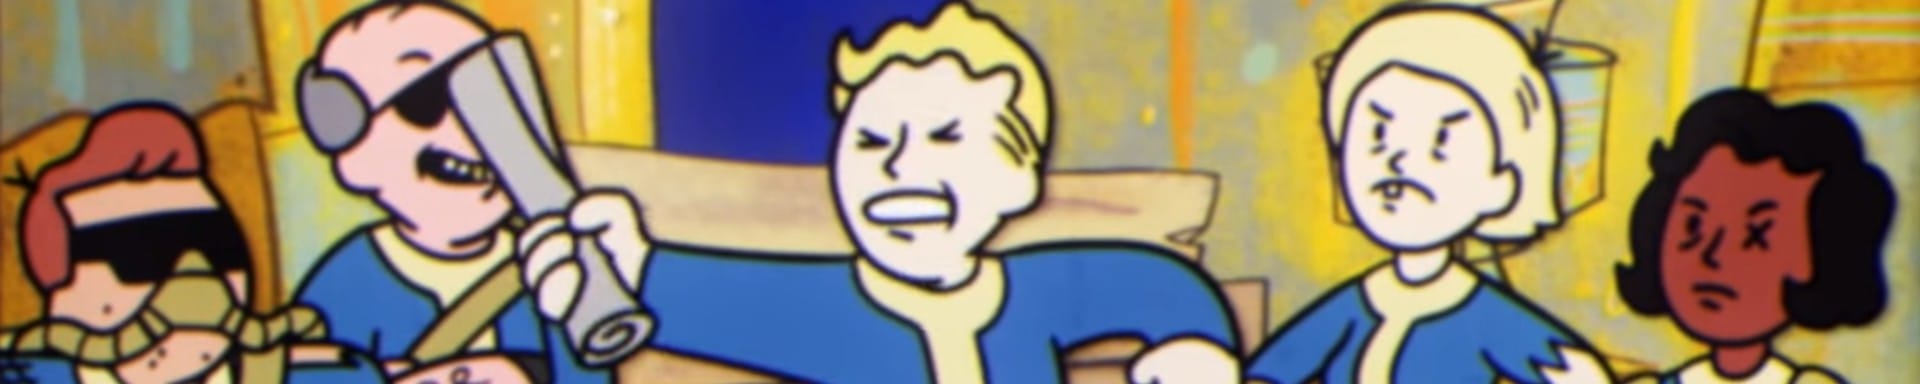 Fallout 76 refunds slice